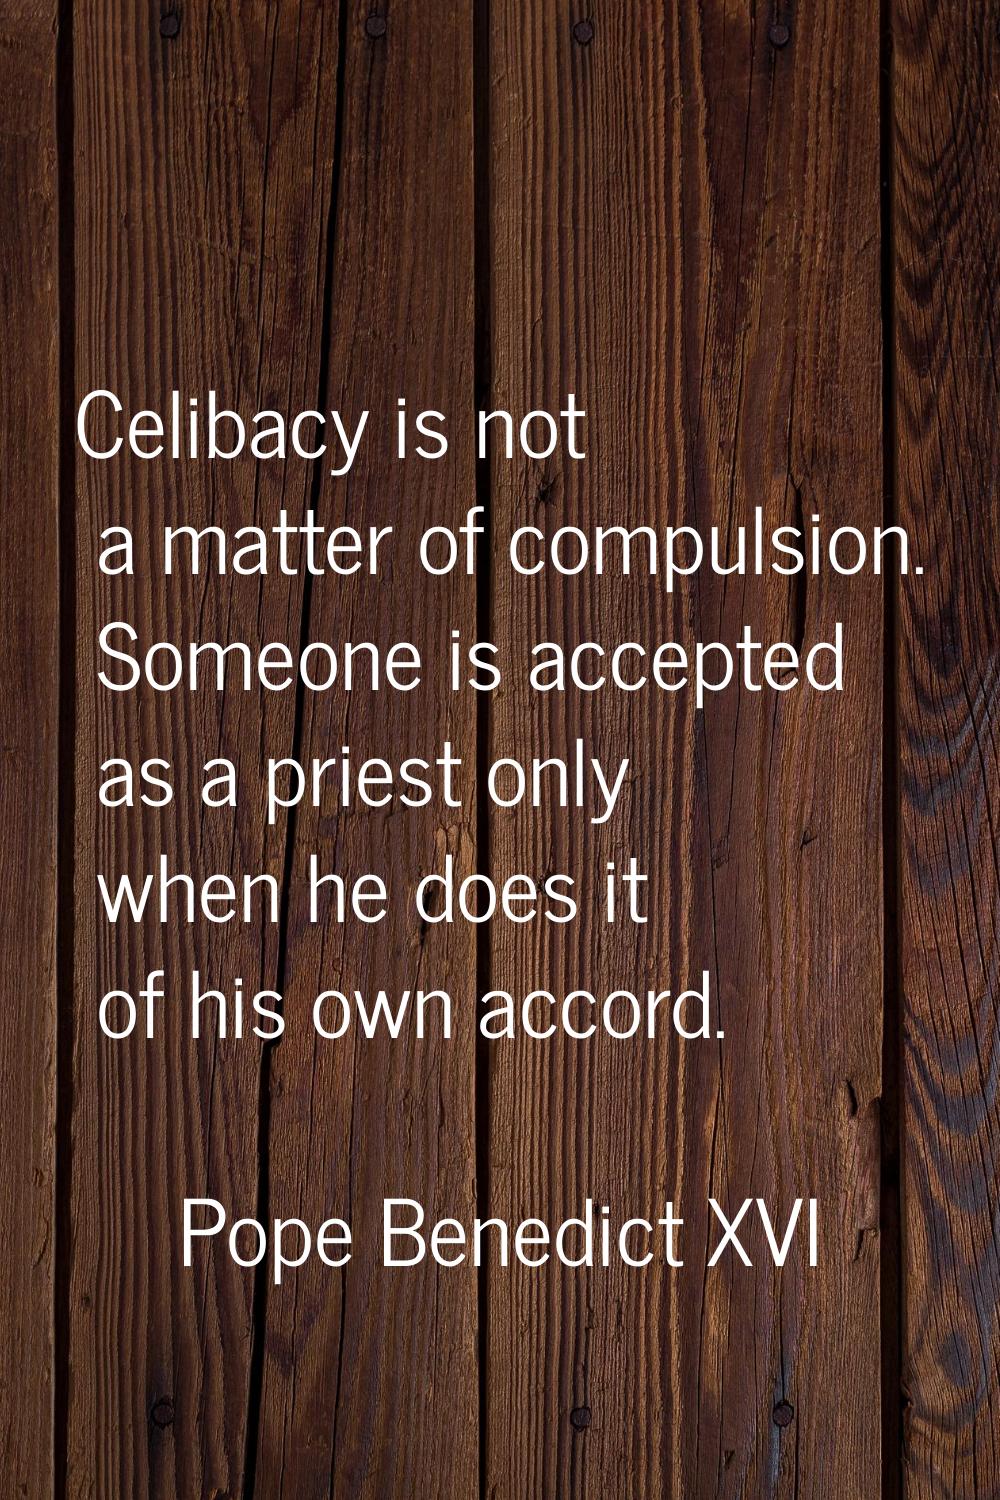 Celibacy is not a matter of compulsion. Someone is accepted as a priest only when he does it of his